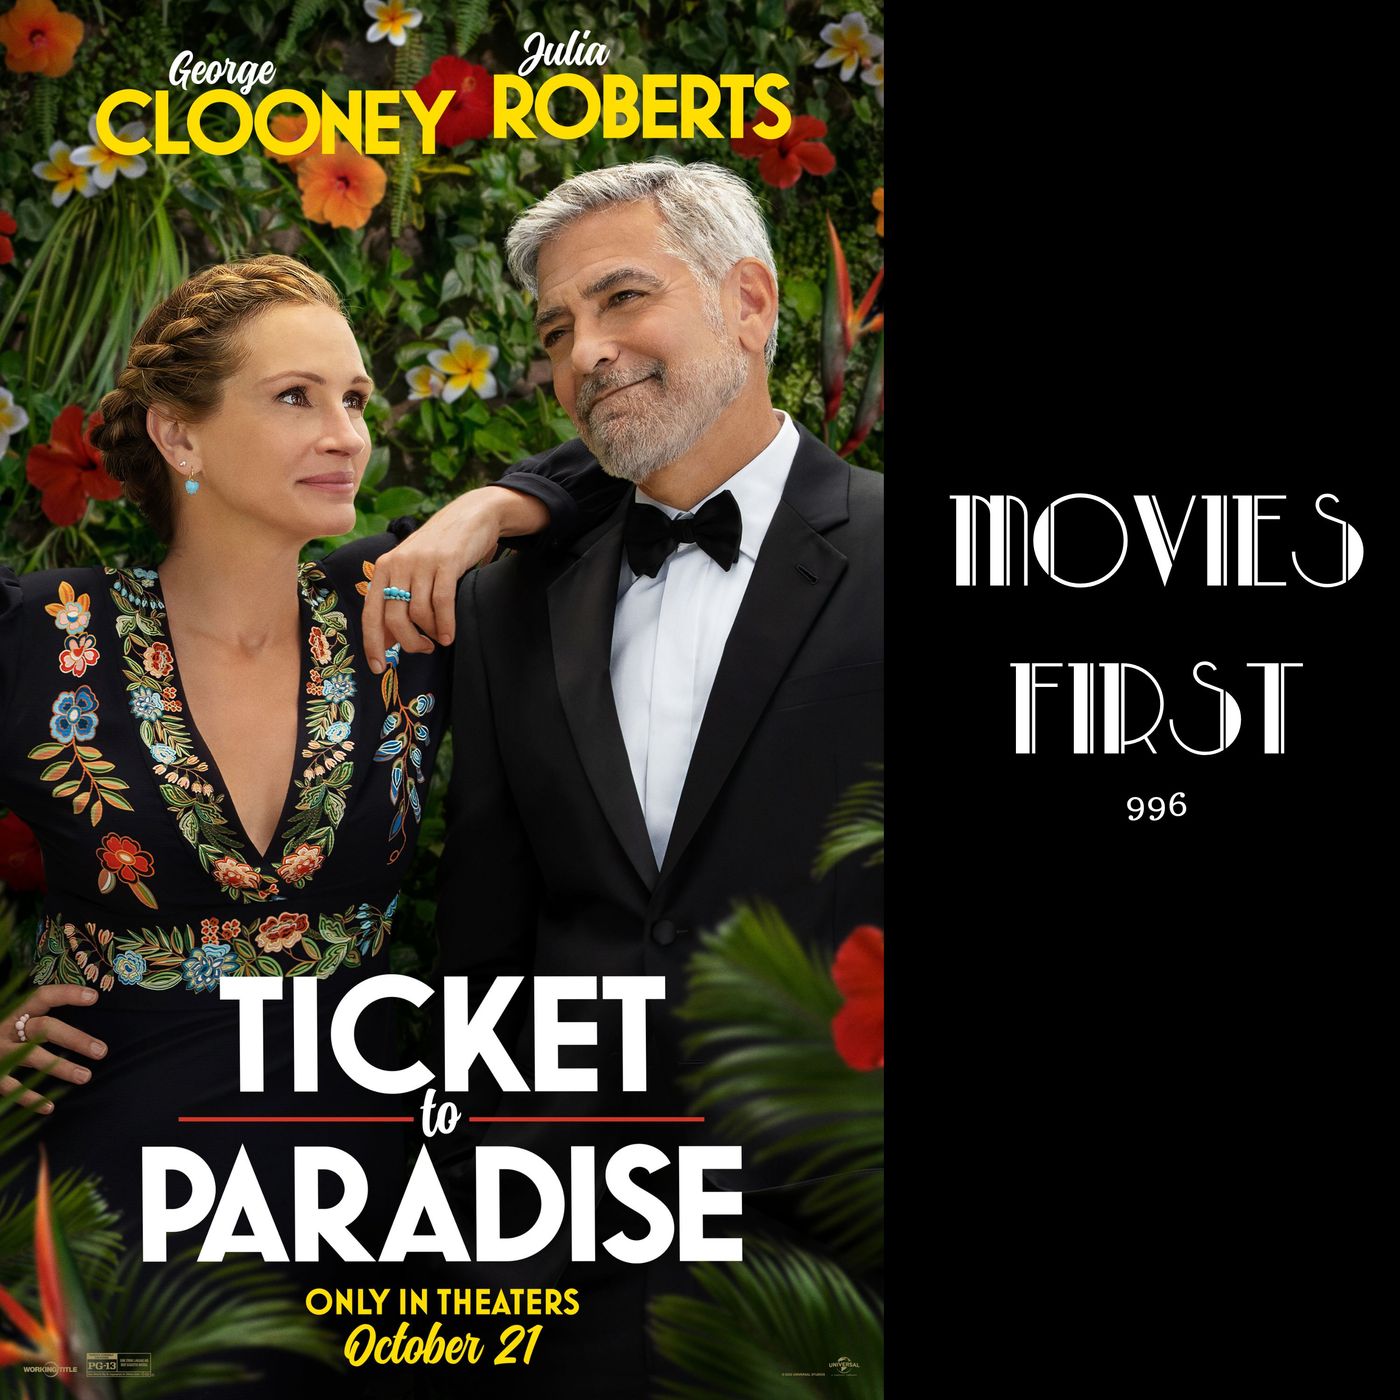 Ticket To Paradise (Comedy, Romance) (review) Image